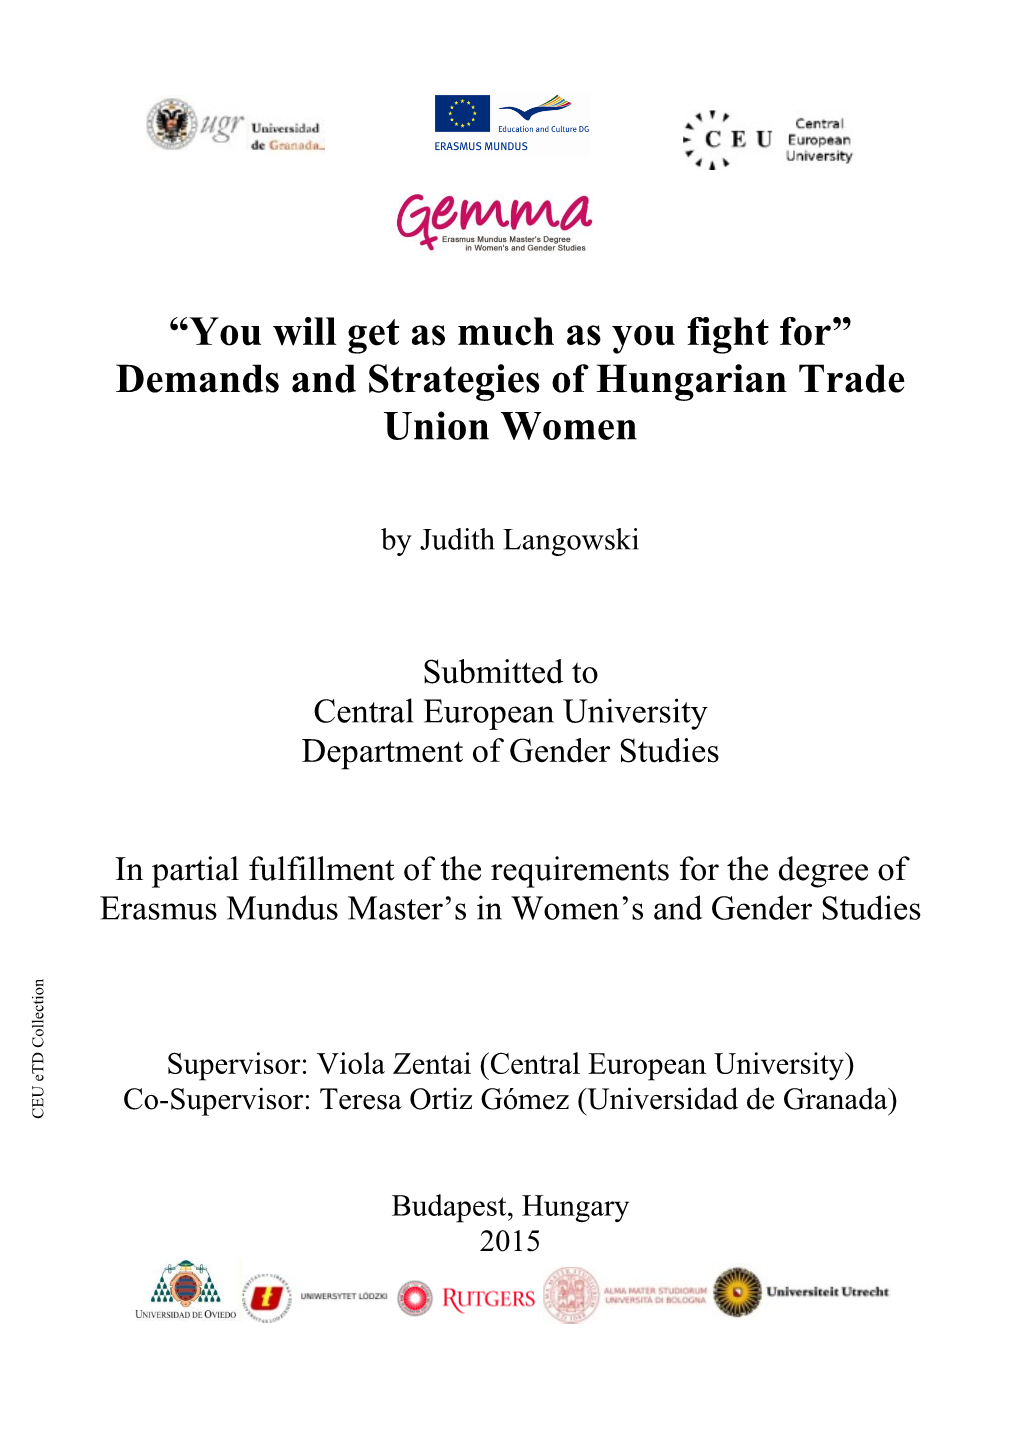 Demands and Strategies of Hungarian Trade Union Women